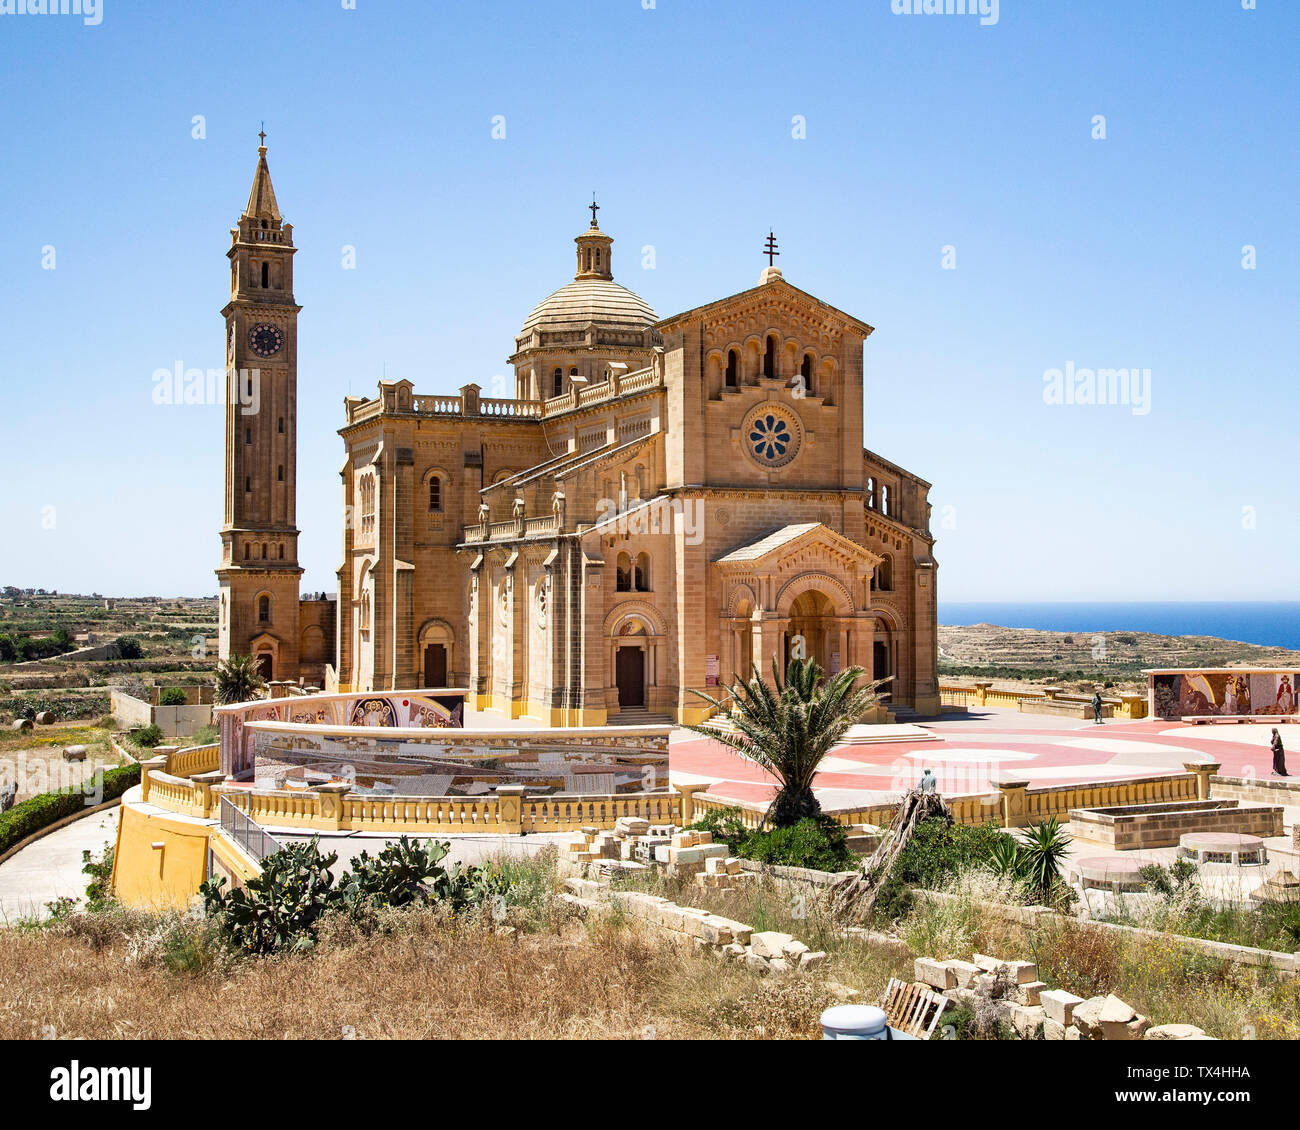 The Basilica of the National Shrine of the Blessed Virgin of Ta' Pinu on Gozo, near Malta Stock Photo